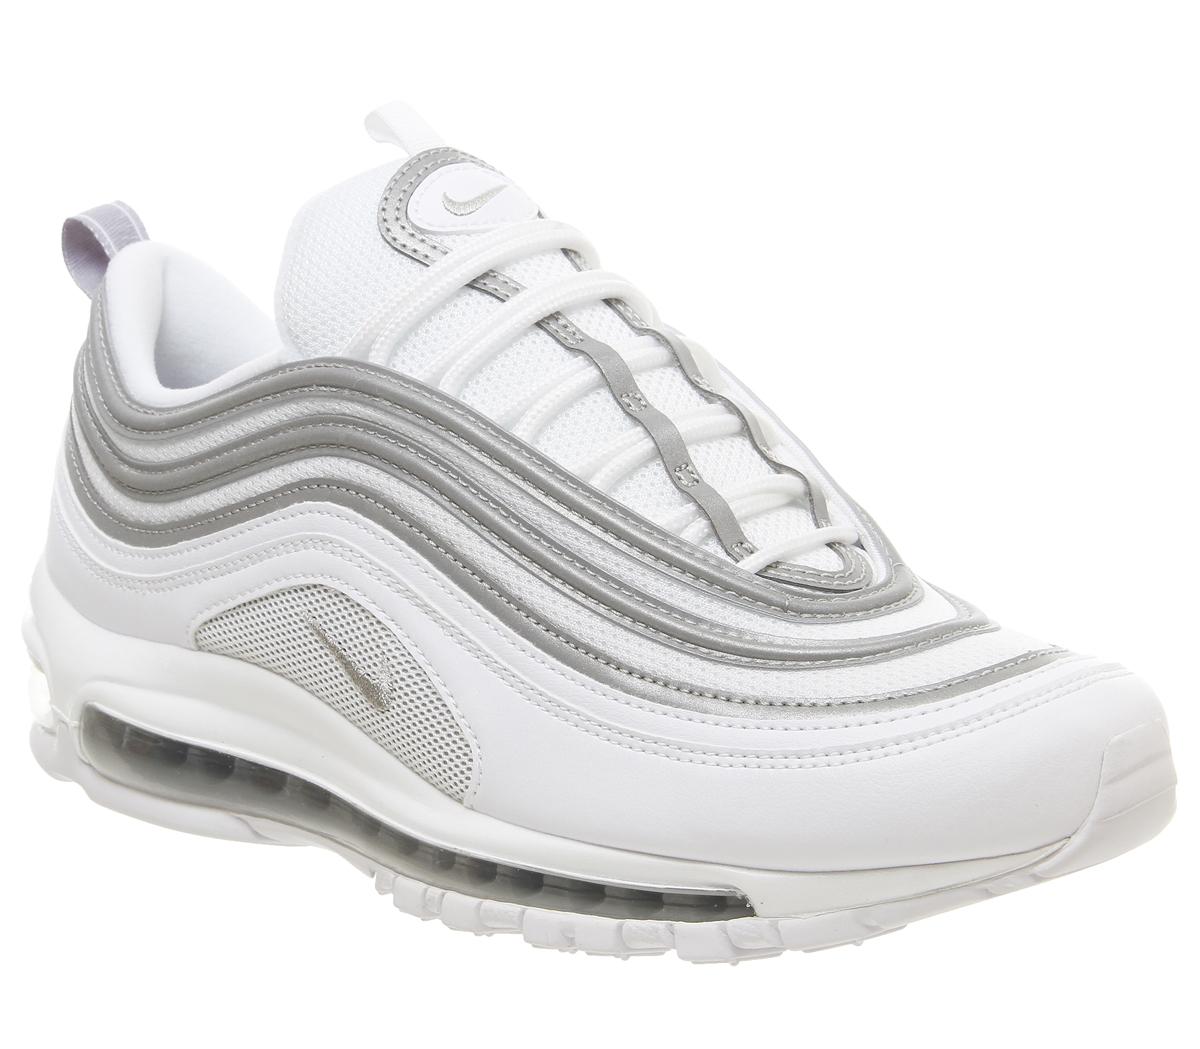 NikeAir Max 97 TrainersWhite Reflect Silver Wolf Grey